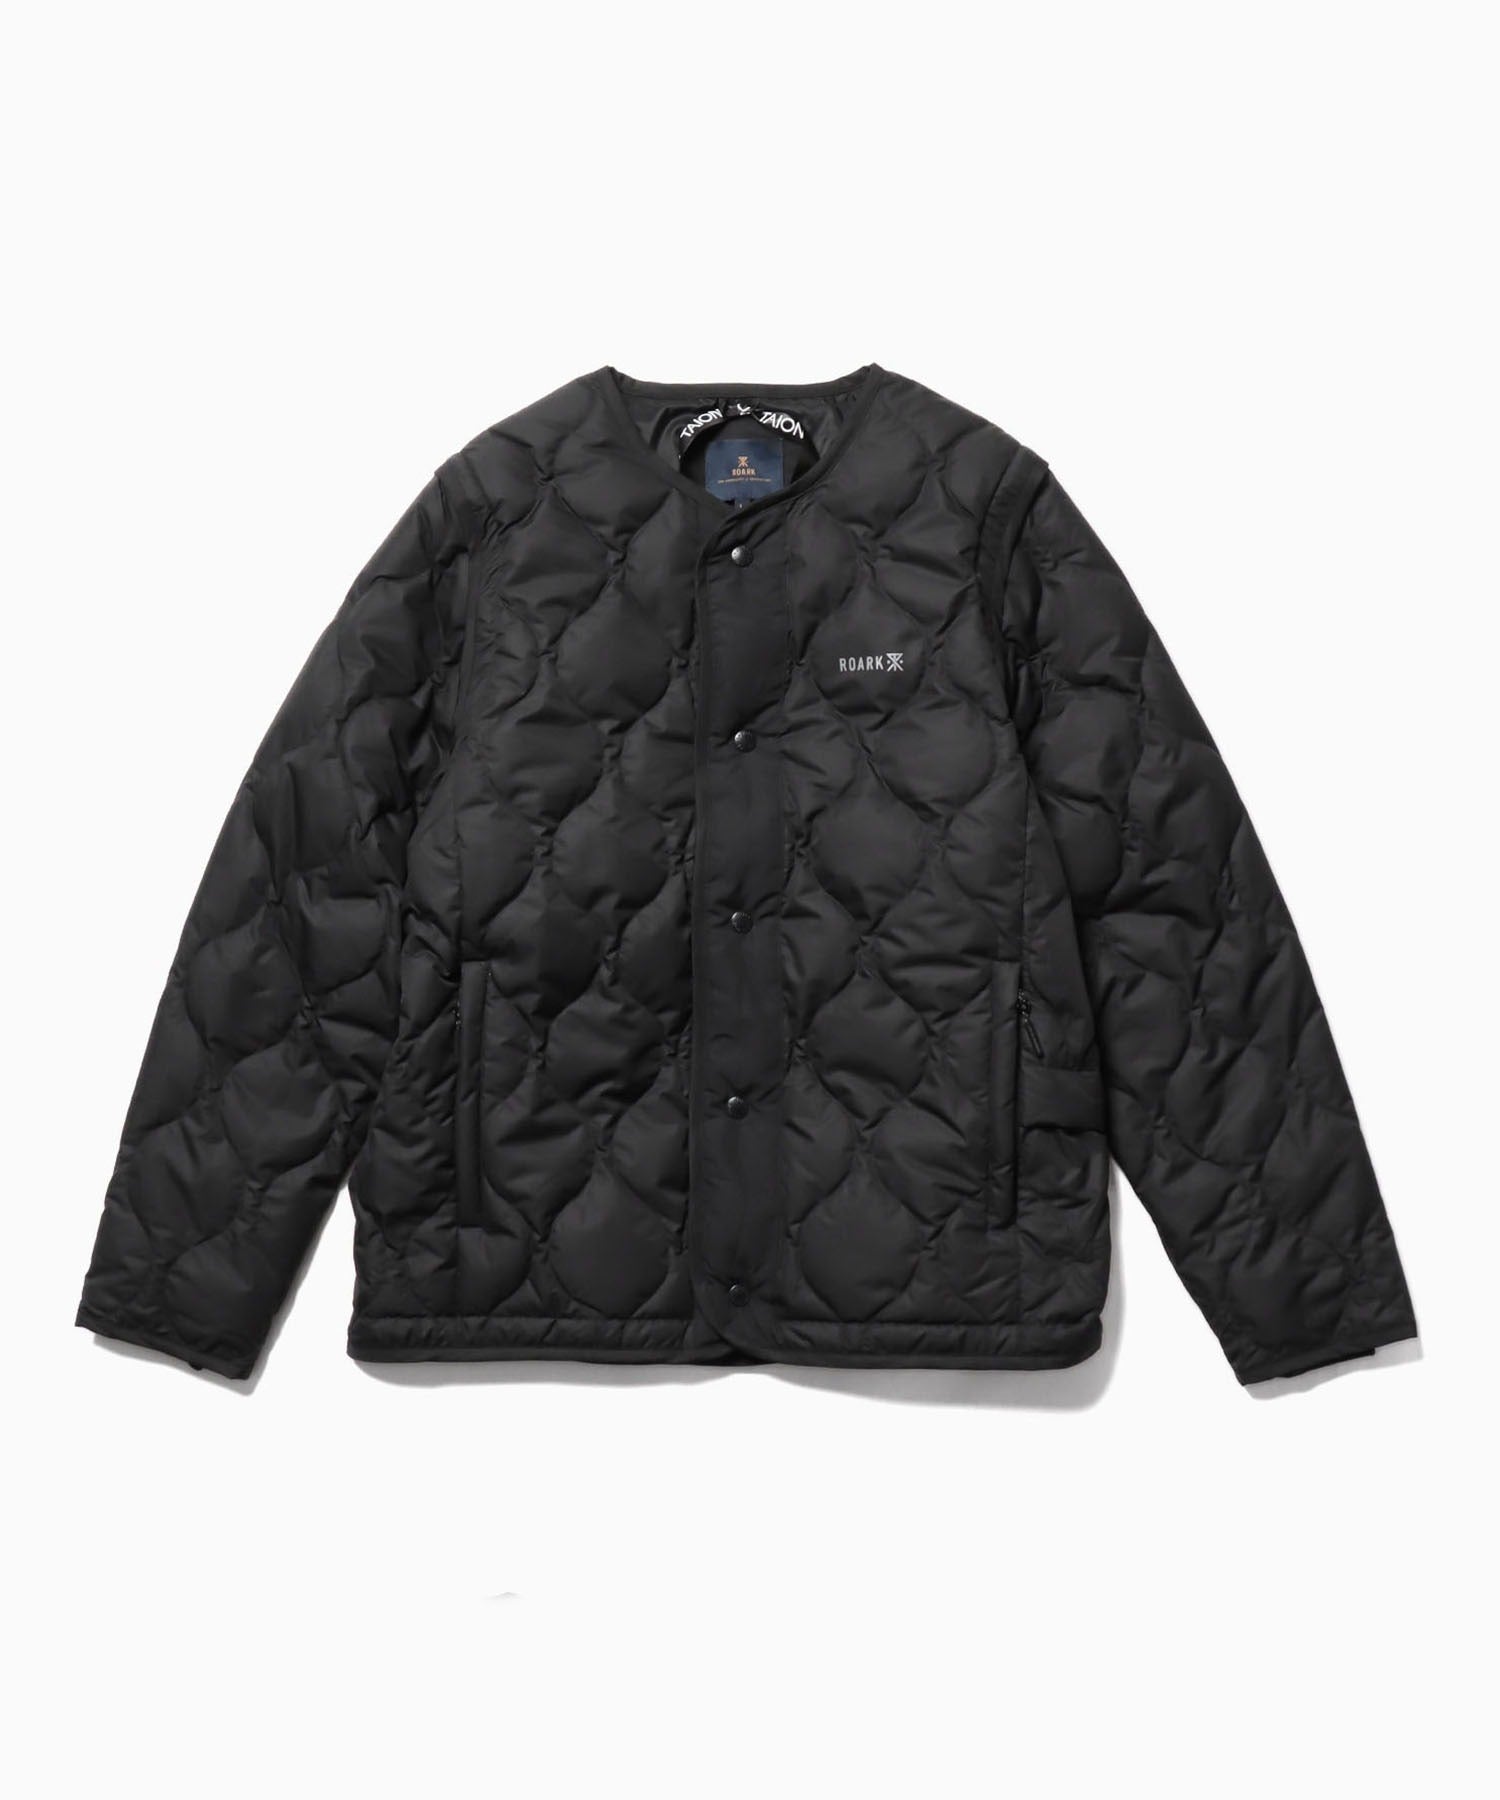 ROARK REVIVAL×TAION HEATHING SYSTEM-EXPEDITTION JACKET